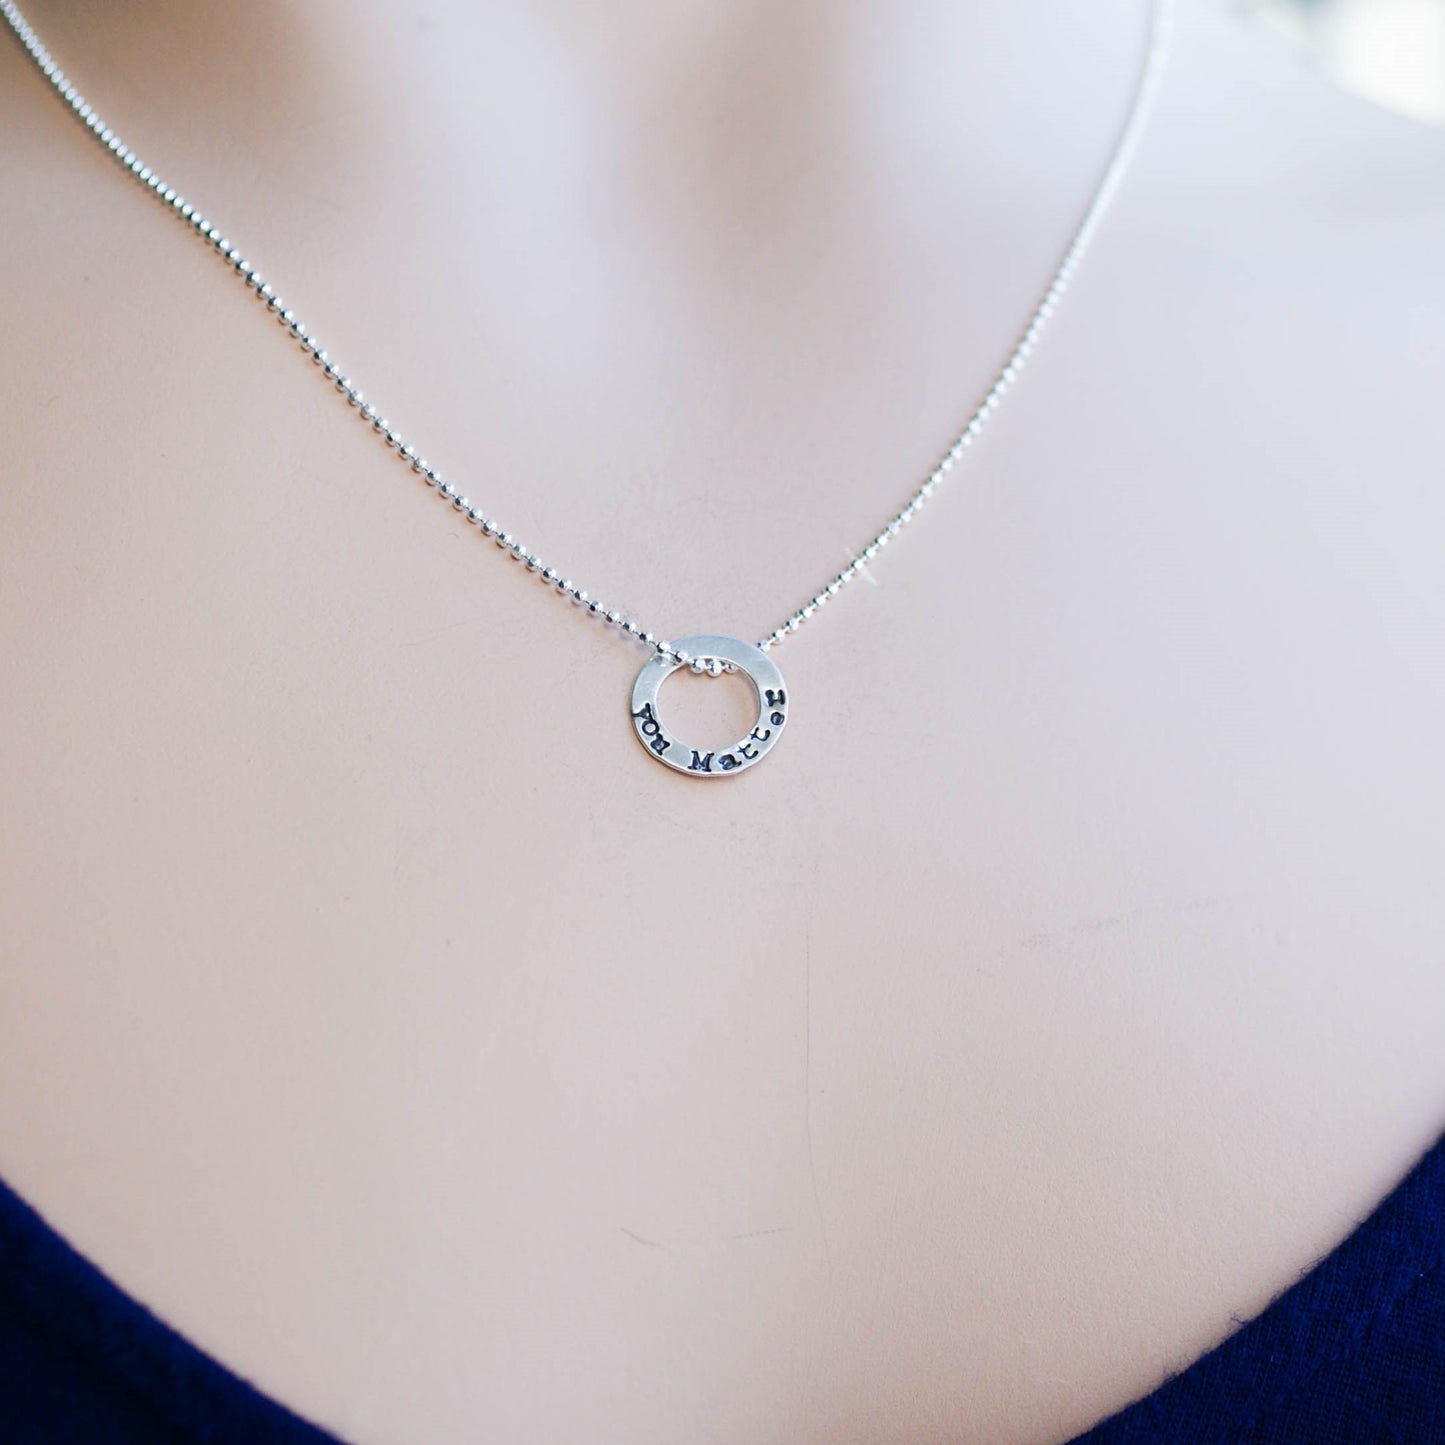 Tiny circle necklace in sterling silver stamped with You Matter on neck